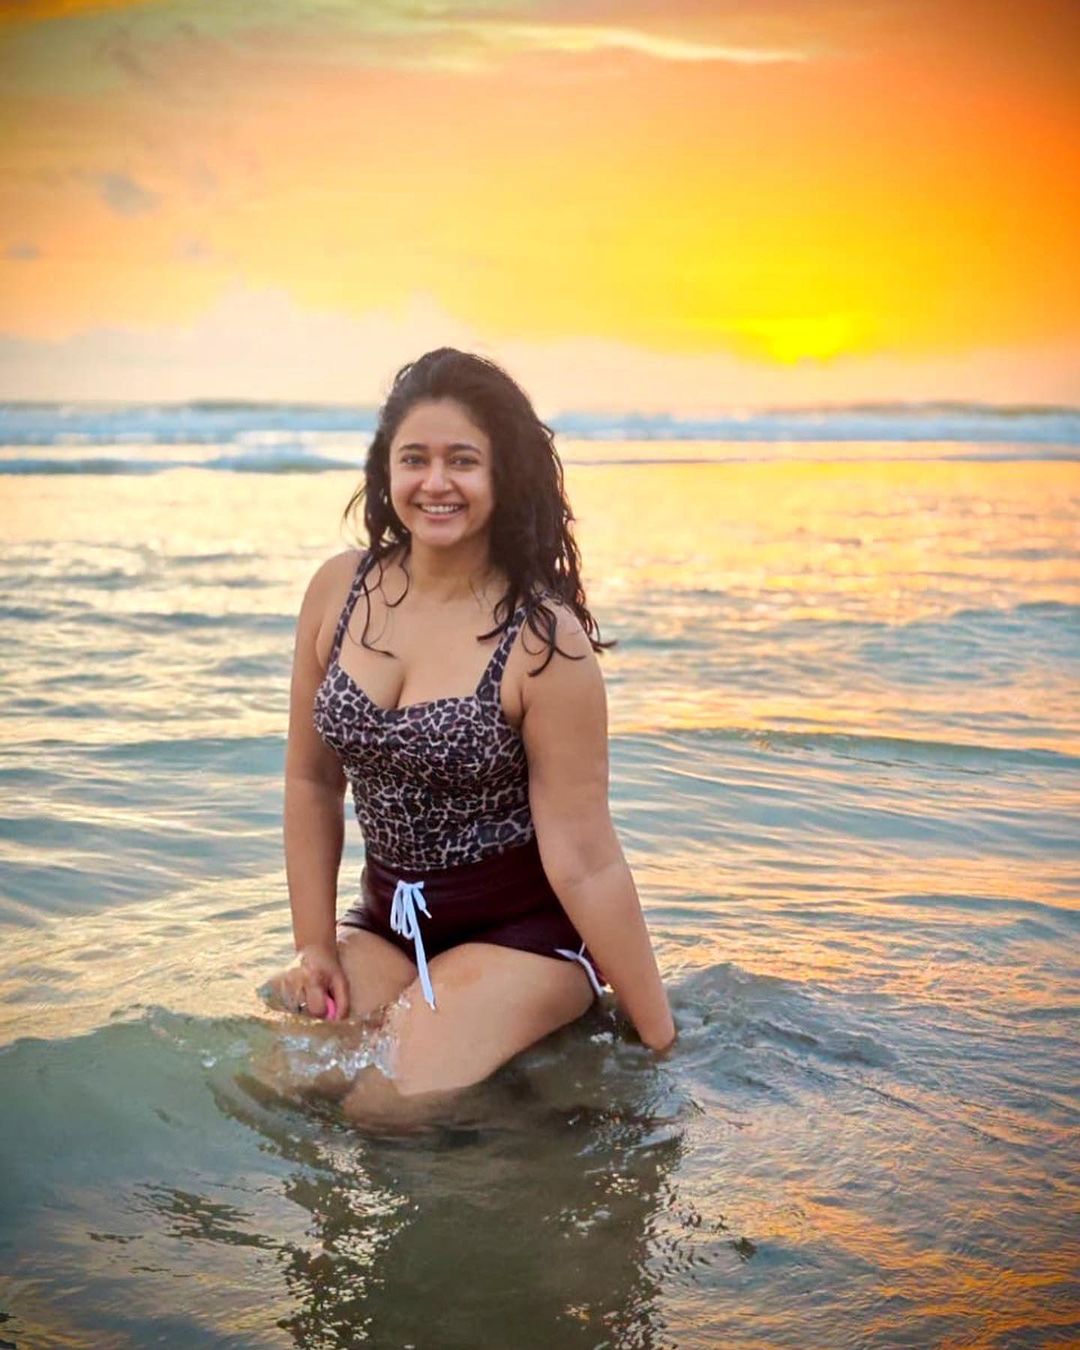 Poonam Bajwa was shared her latest photos in social media